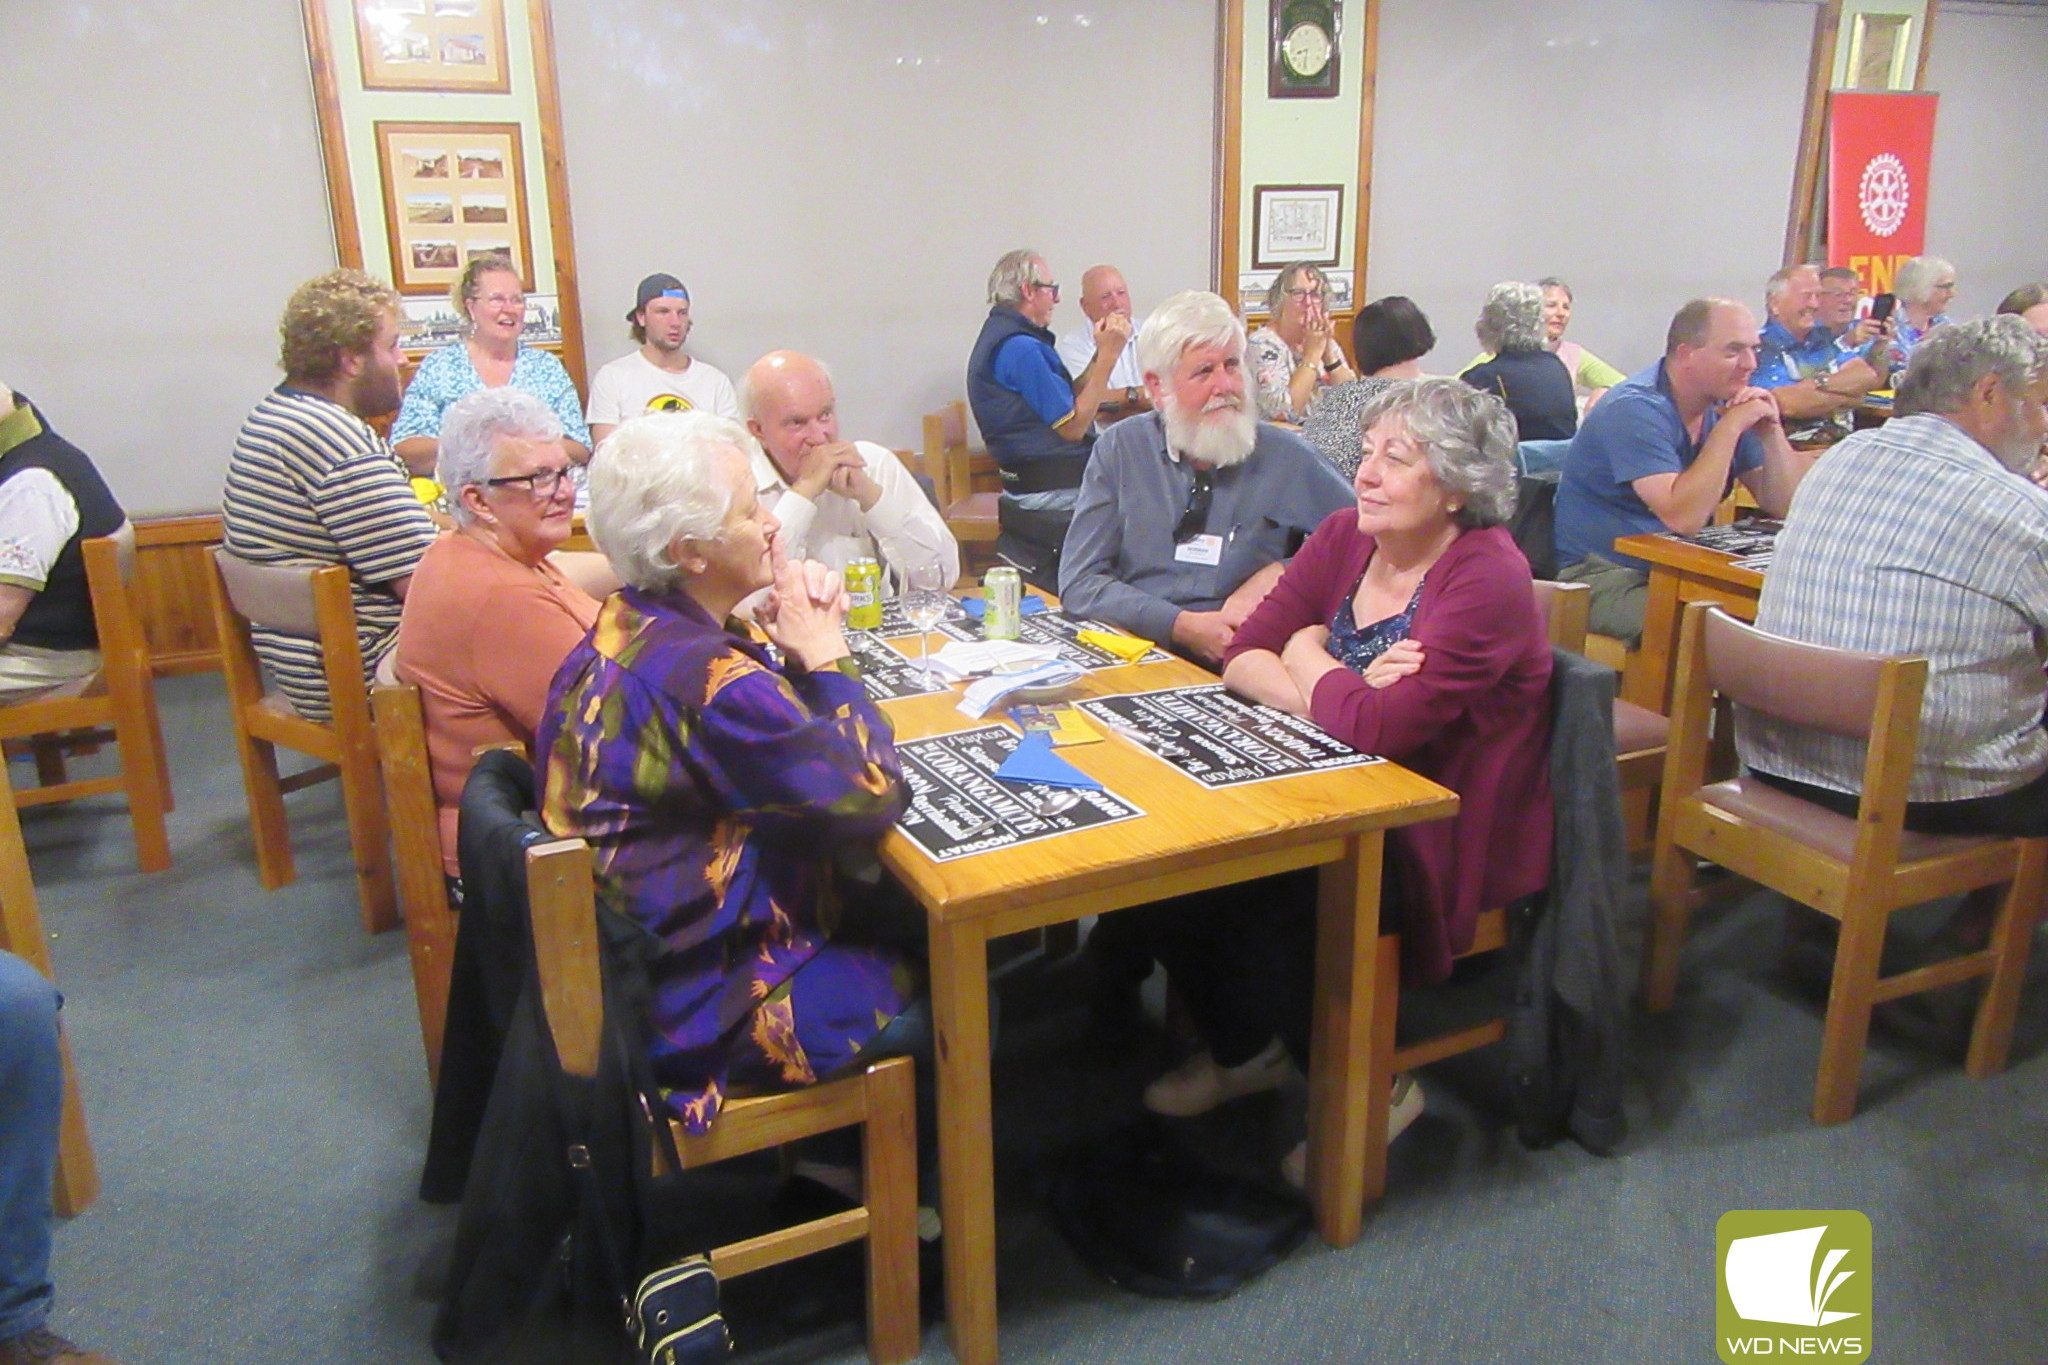 Busy times for the fellowship: Camperdown Rotary Club members have enjoyed fellowship amongst peers at one of many Rotary events held over the past few weeks.